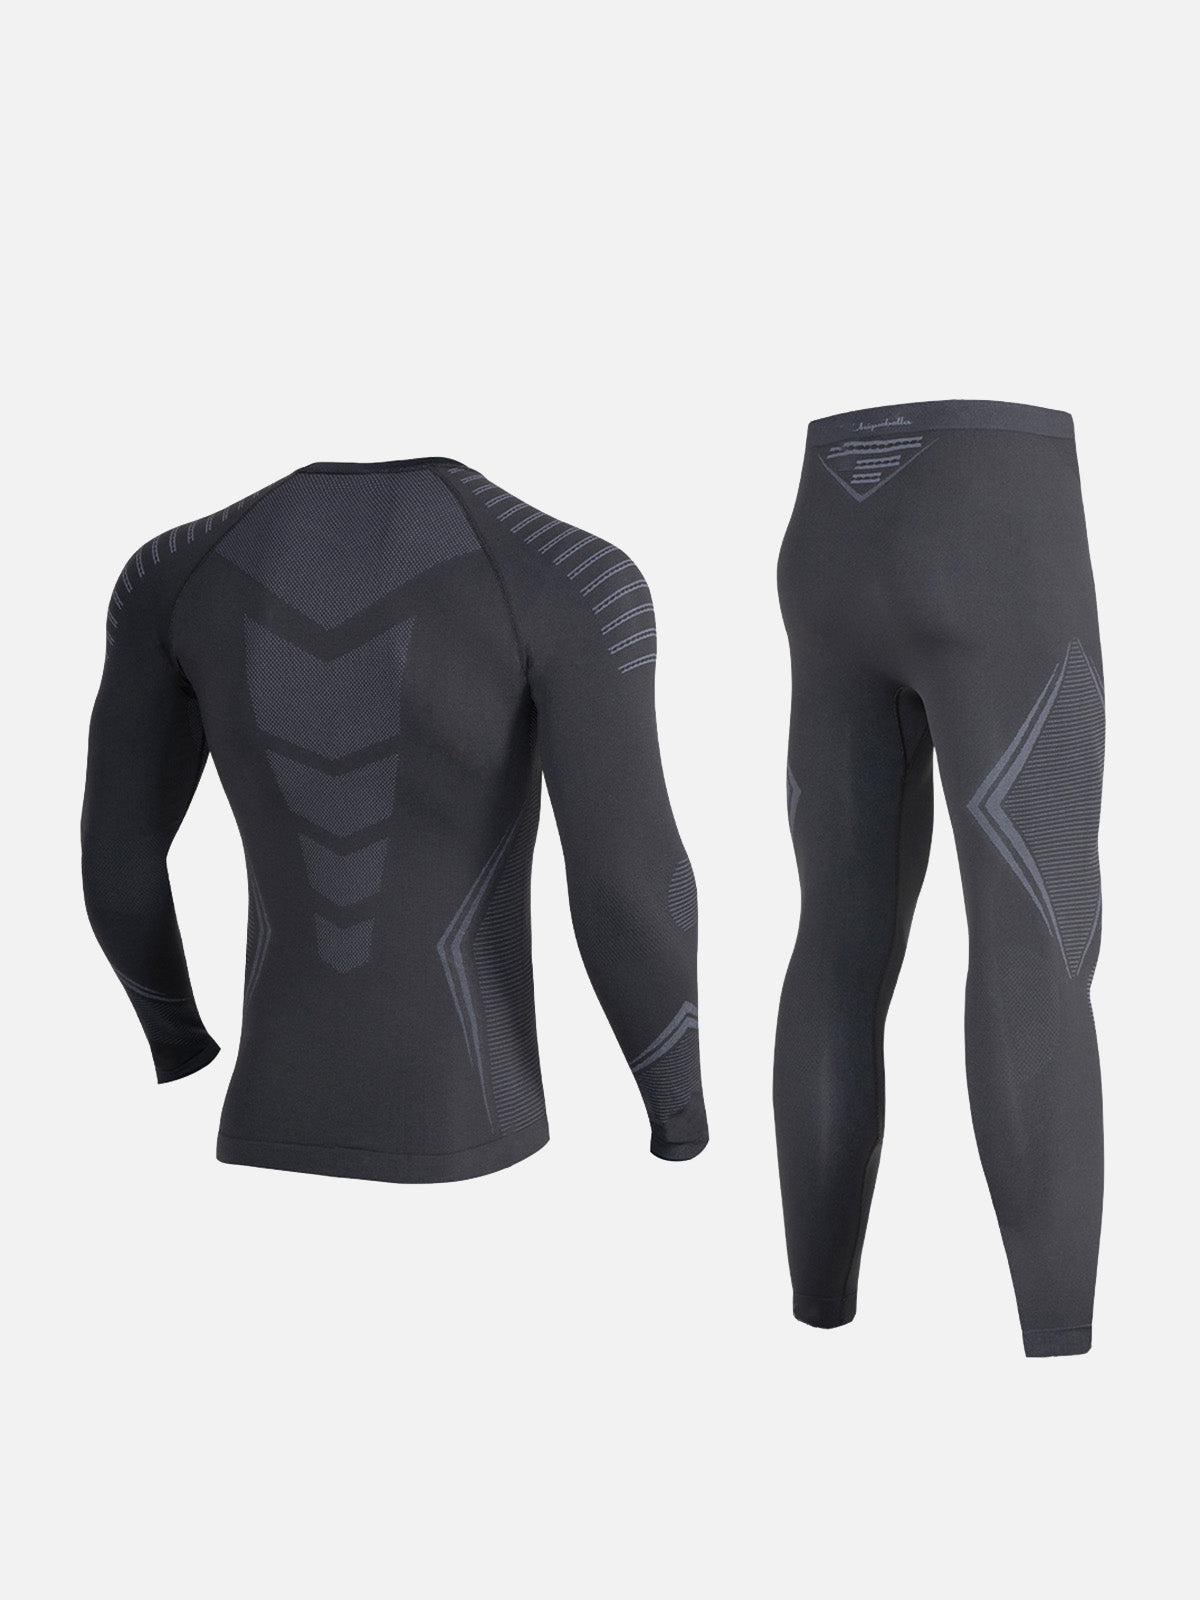 Uniquebela Men's Thermal Underwear Baselayer Set for Winter, Cold Weather, Skiing